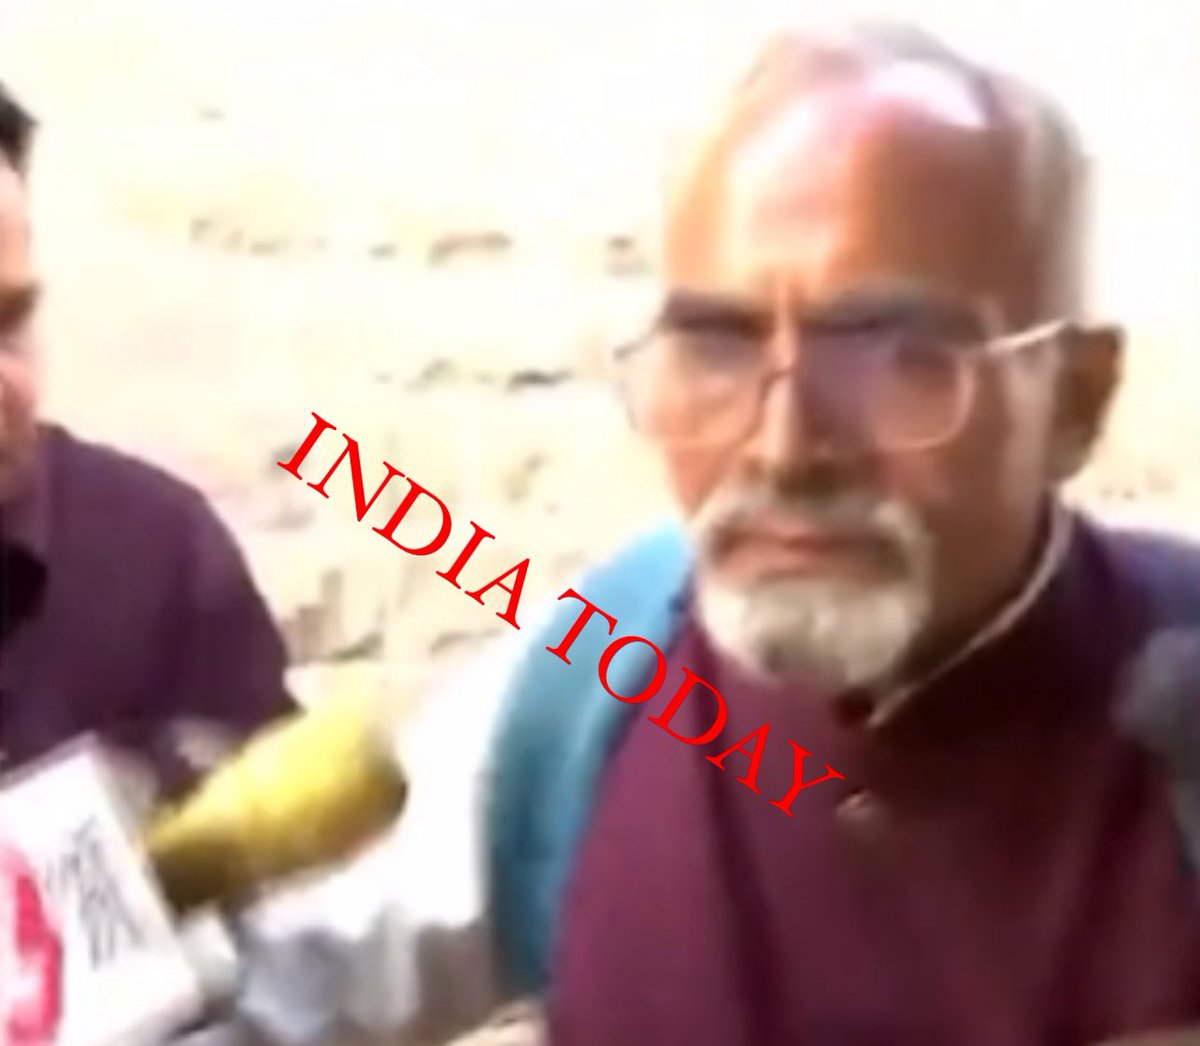 And here’s Dr LN Danwade, Juvenile Justice Board member who granted swift bail to the teen Porsche driver within 30 min, with 300-word essay etc as bail conditions. That single action made this a national story. He’s probe now. Confronted here by @IndiaToday’s @dipeshtripathi0: